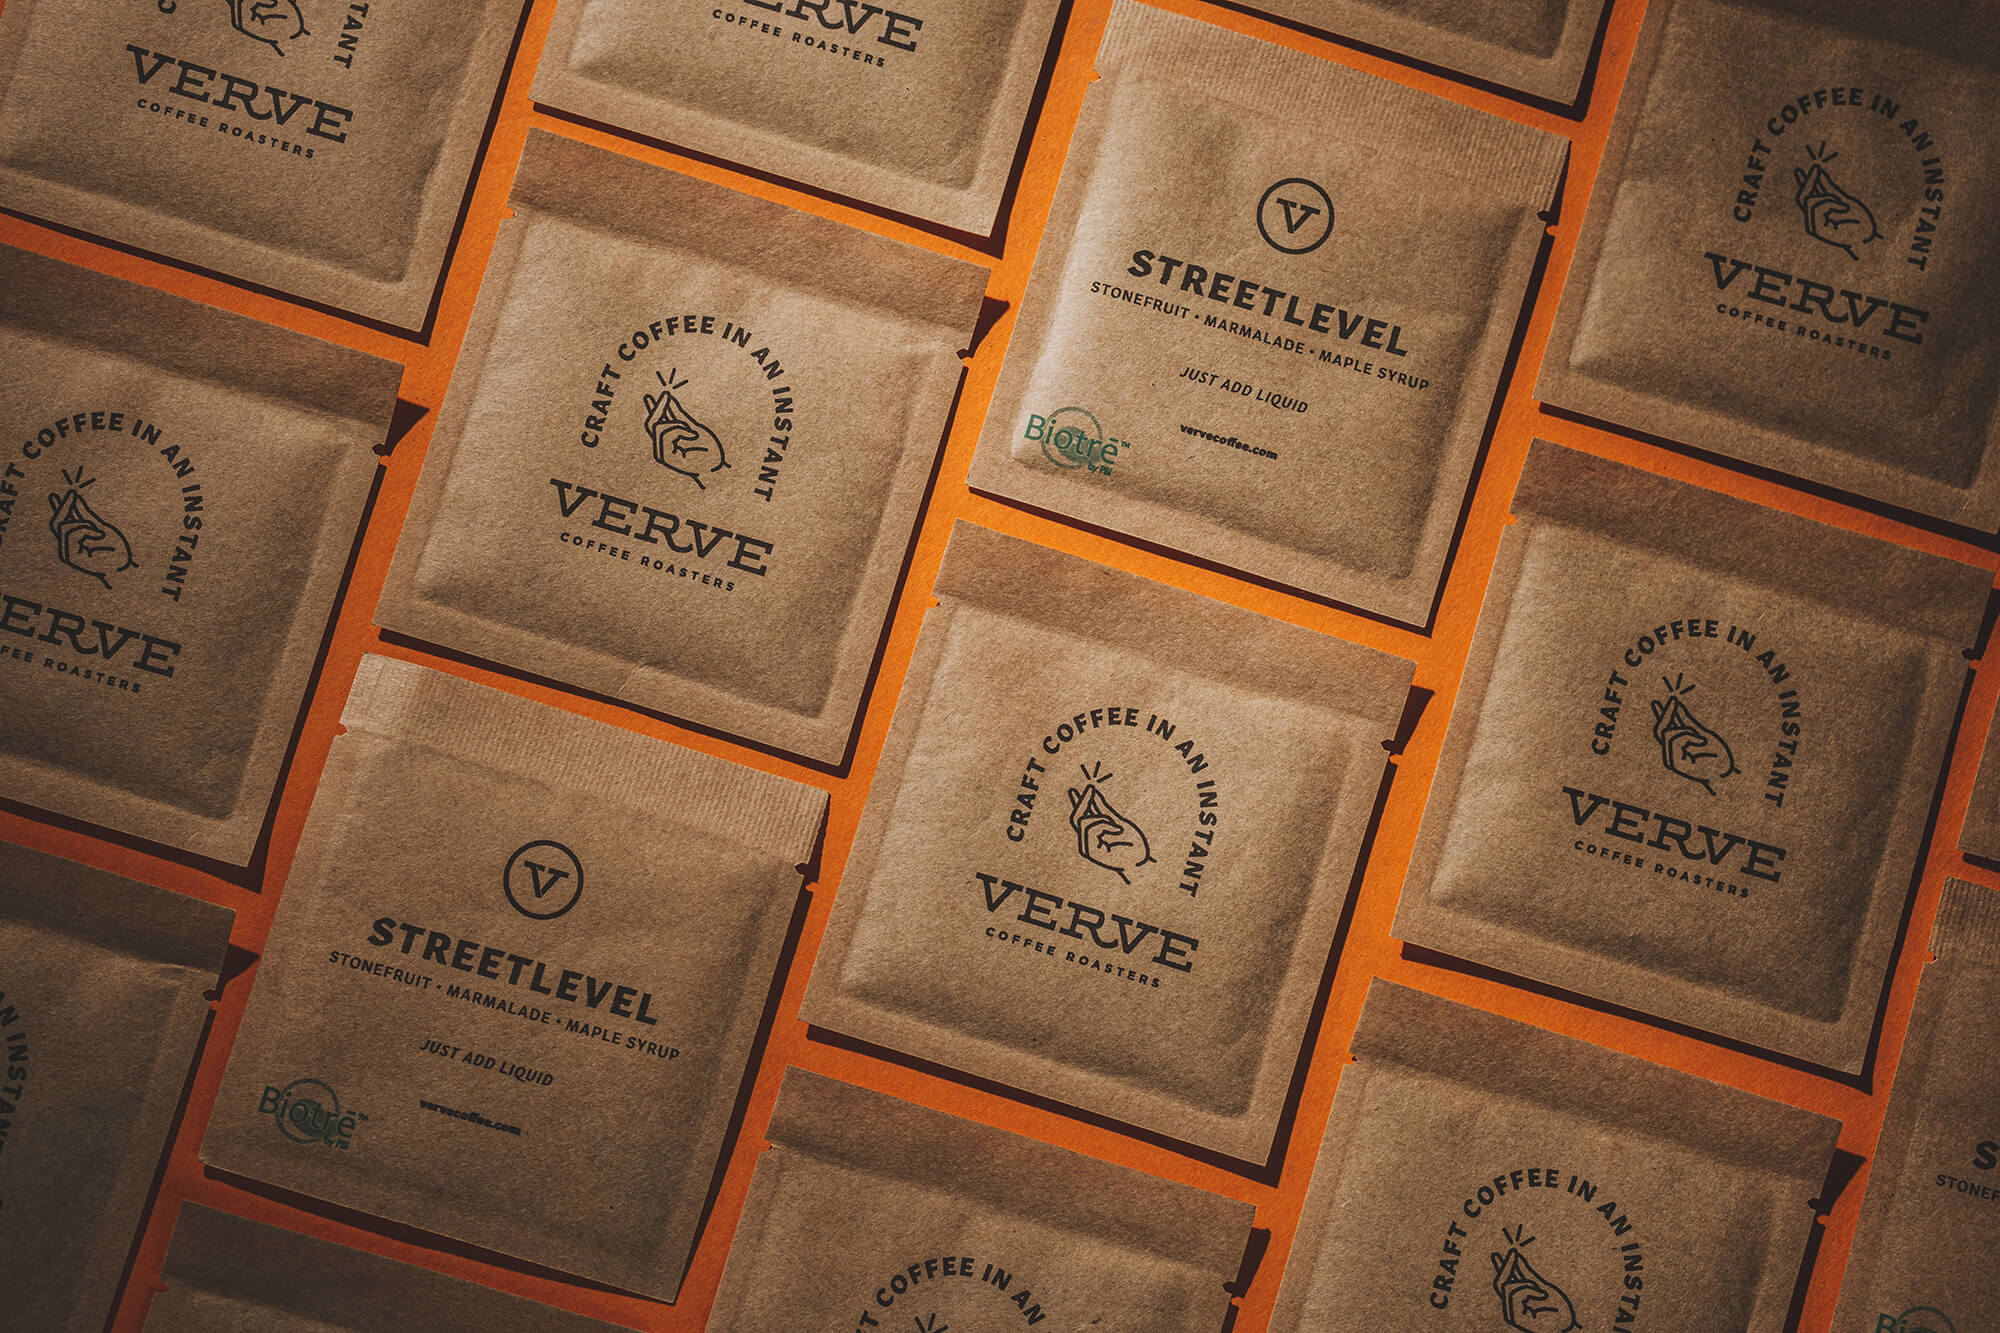 Verve instant craft coffee packets